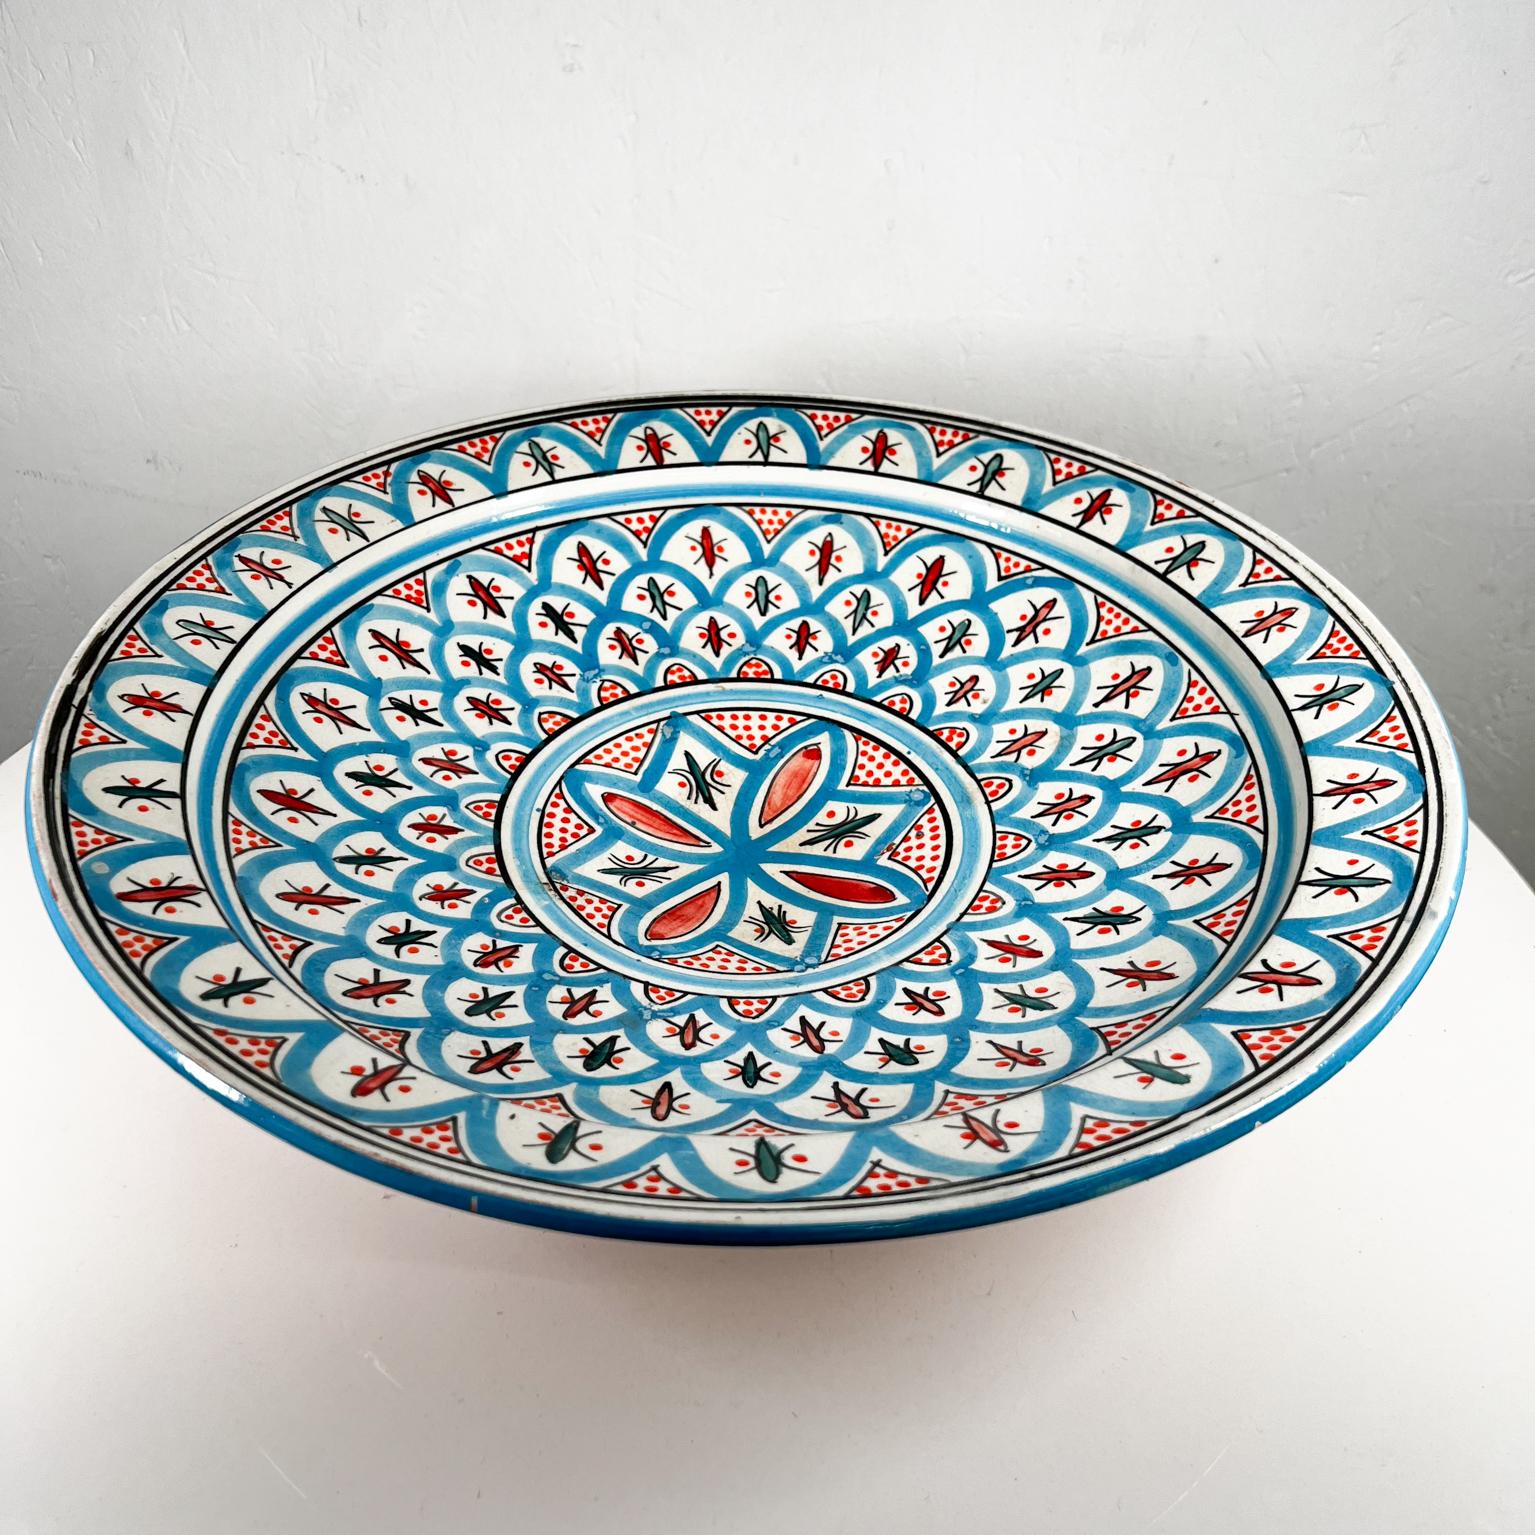 Moroccan Hand Painted Blue Platter Assala Safi pottery
16.75 diameter x 3.5 tall
Festive large party plate.
Signed on the back.
Original vintage condition.
See images provided.